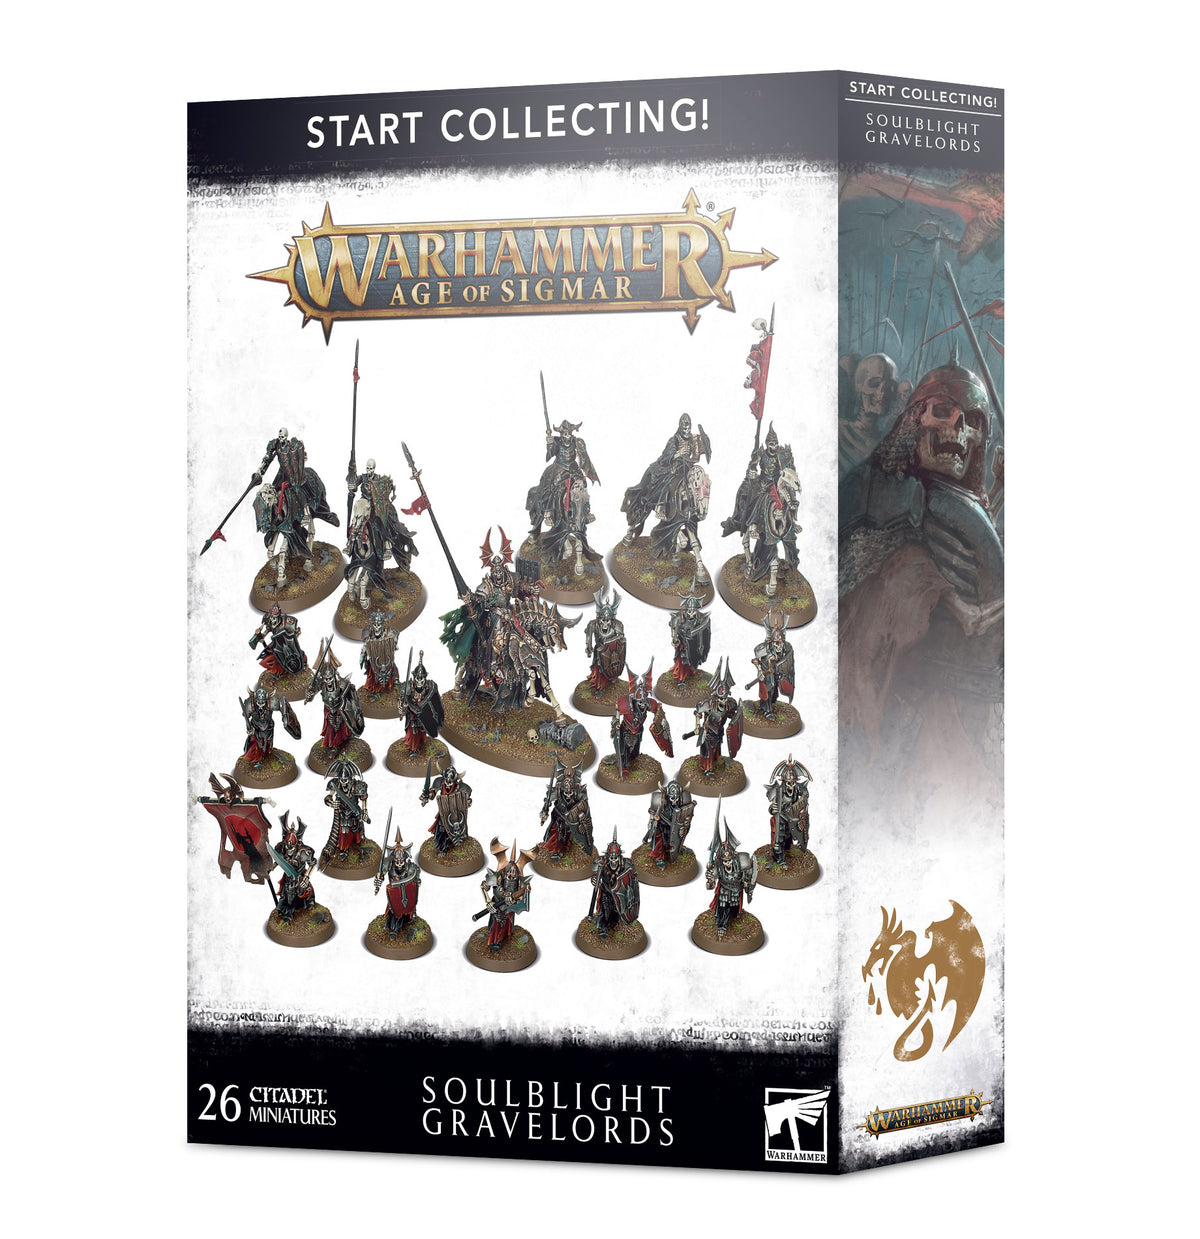 Start Collecting - Soulblight Gravelords (Warhammer Age of Sigmar)